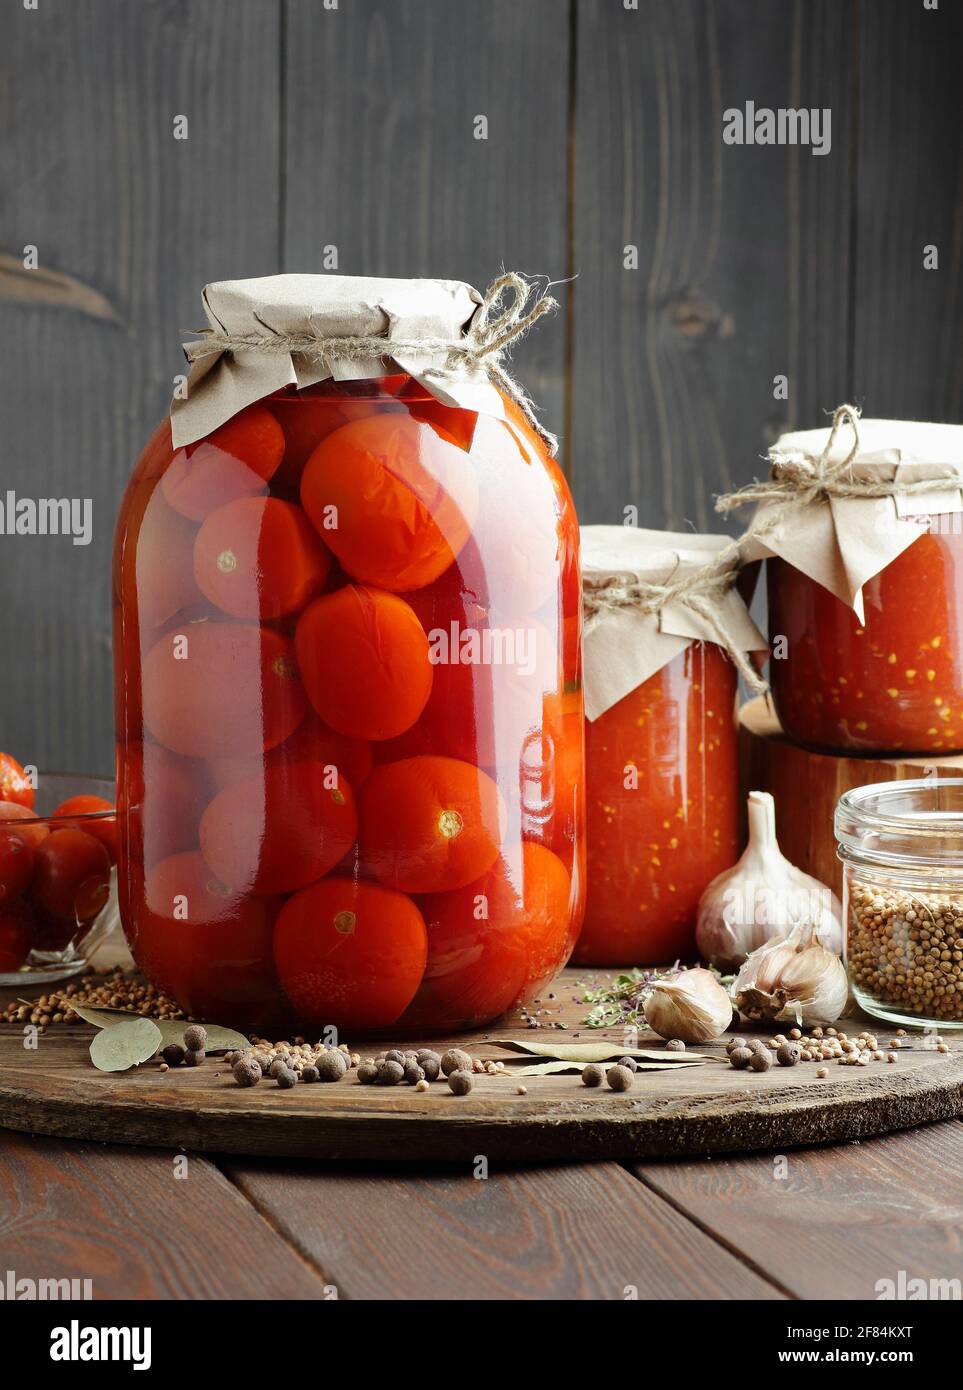 https://c8.alamy.com/comp/2F84KXT/canned-tomatoes-in-glass-jar-on-wooden-rustic-table-in-pantry-or-village-kitchen-closeup-cottagecore-simple-living-aesthetics-home-storage-solutio-2F84KXT.jpg